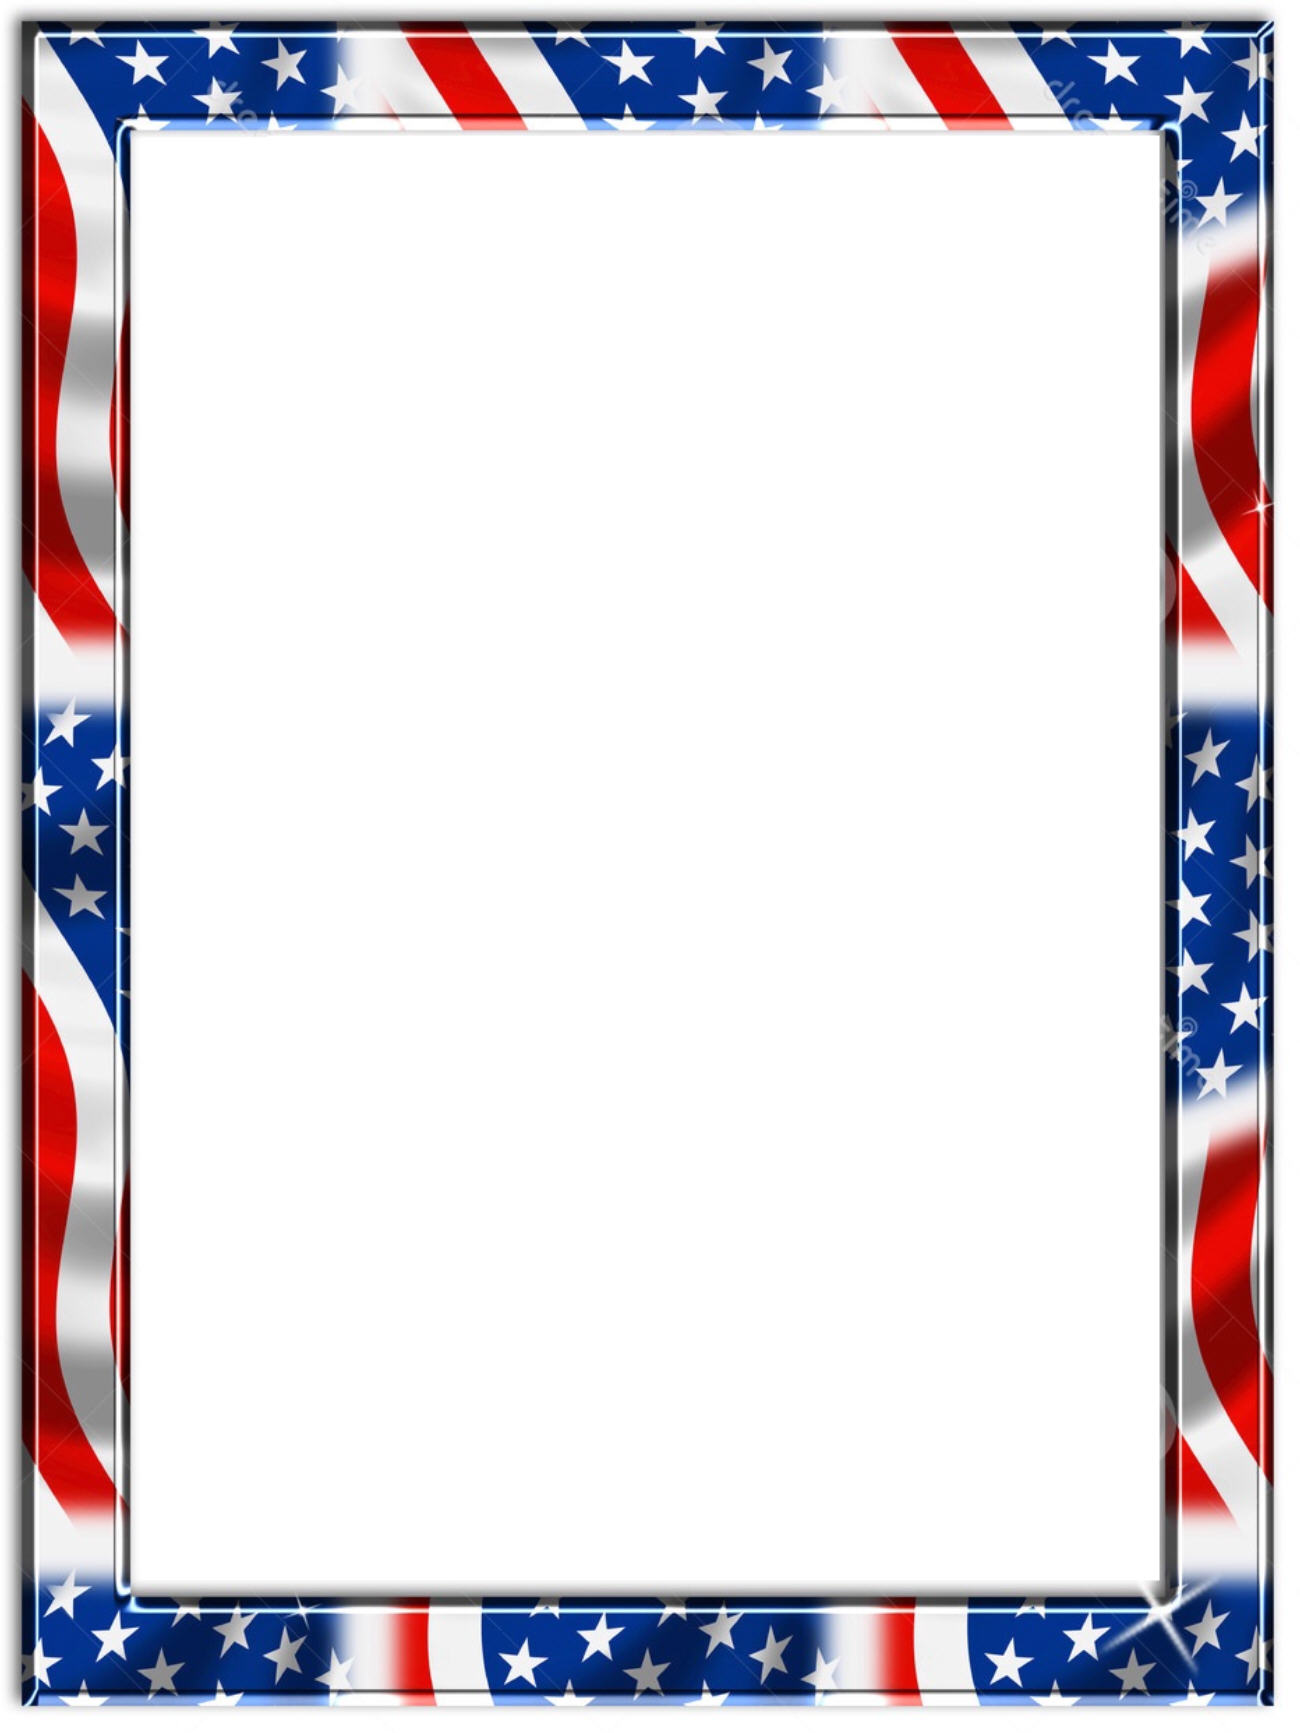 background designs for word documents usa flag